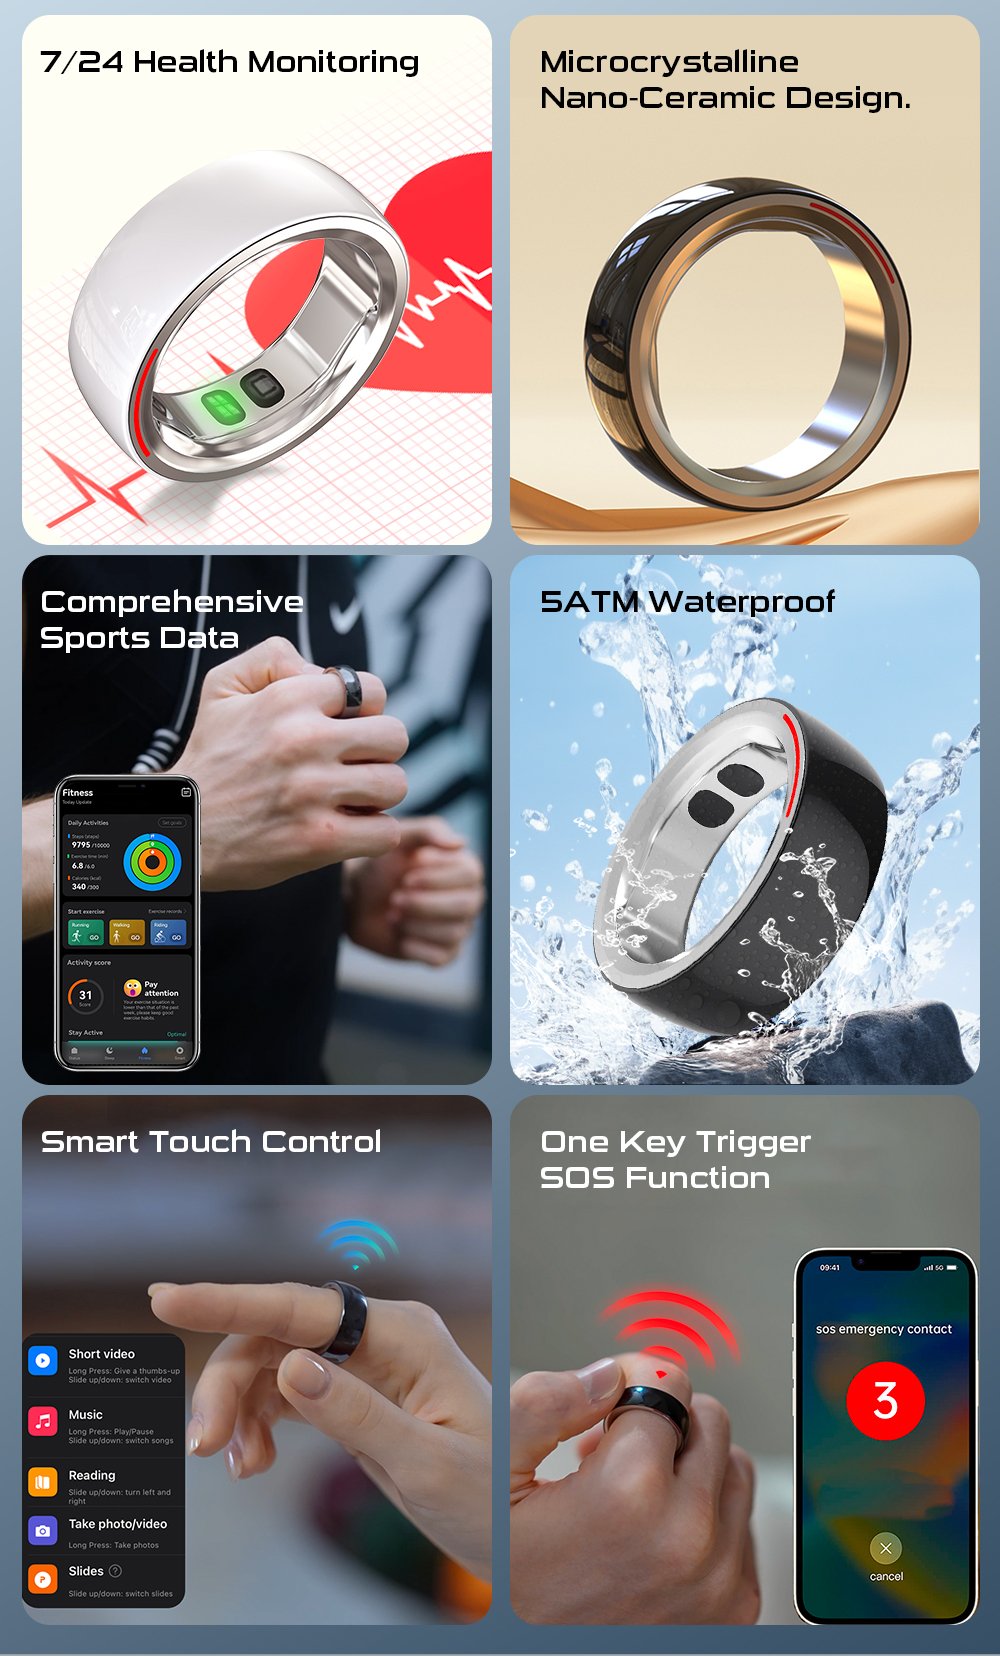 Rogbid Smart Ring Launched with a Nano-Ceramic Design, 24/7 health monitor,  Smart Touch Control